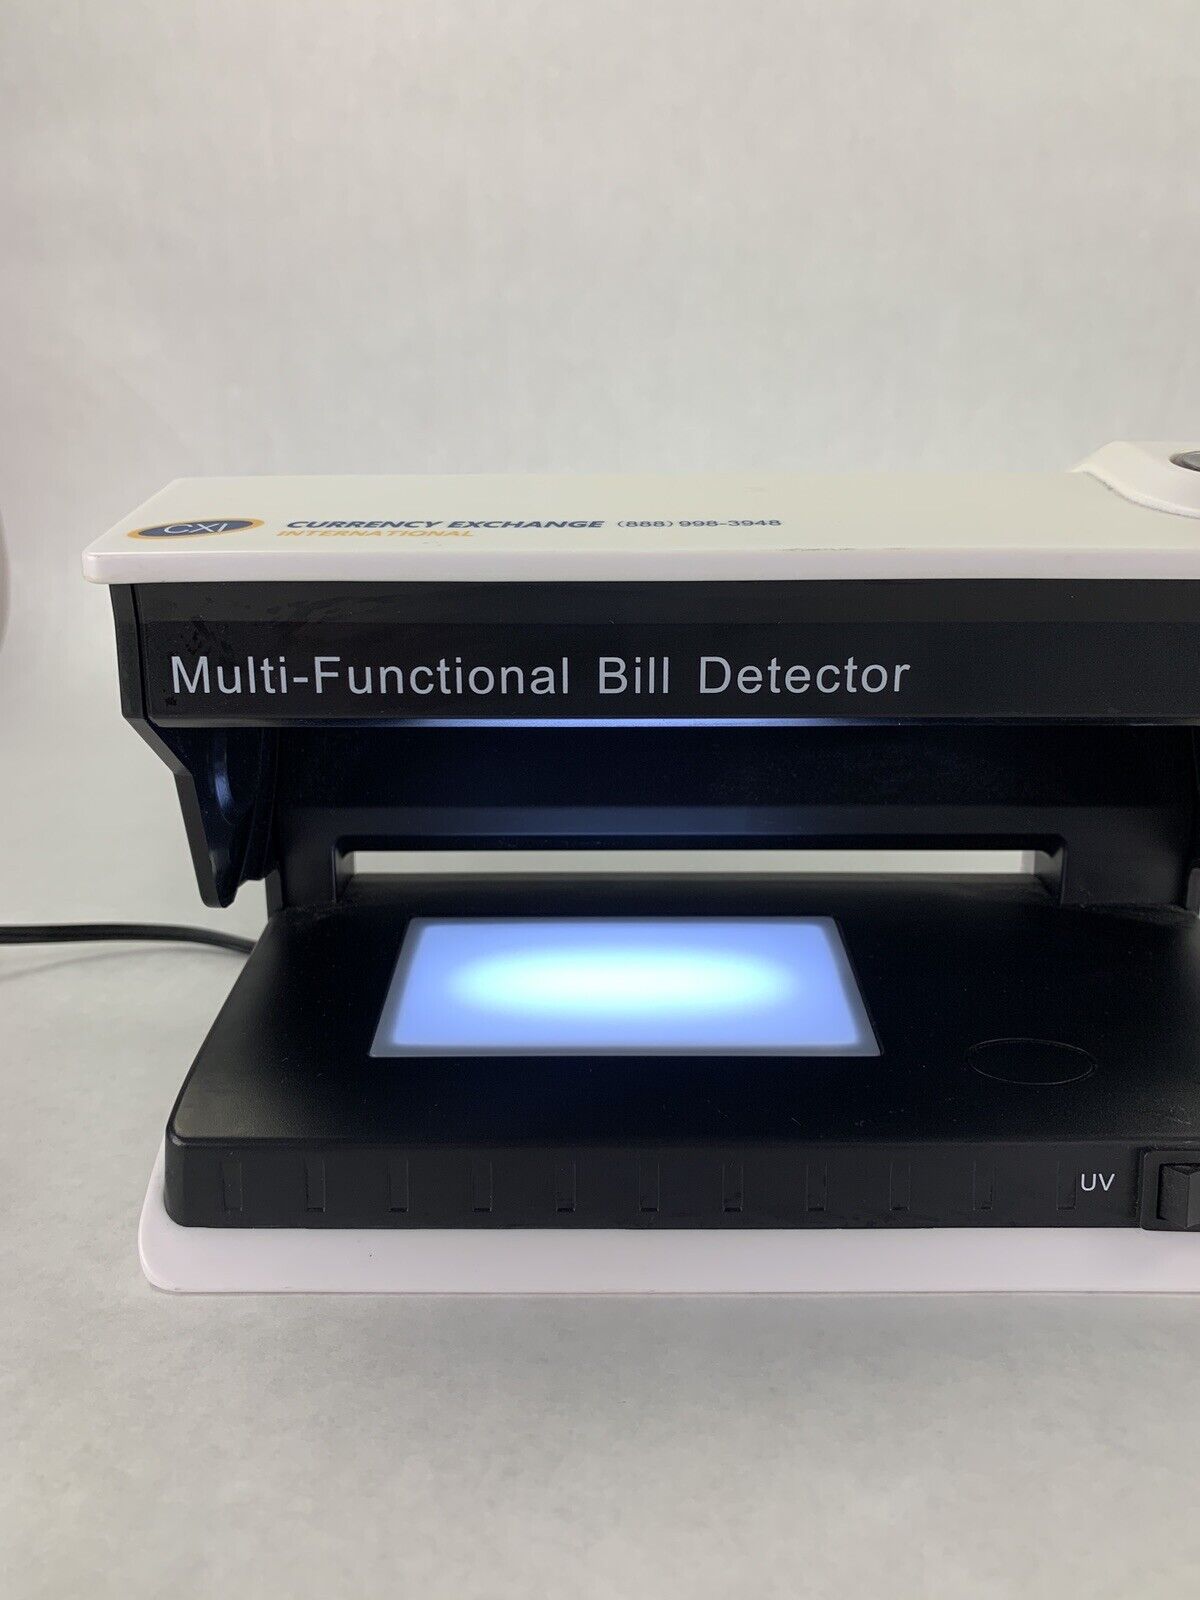 CXI Multi-functional Bill Detector Tested